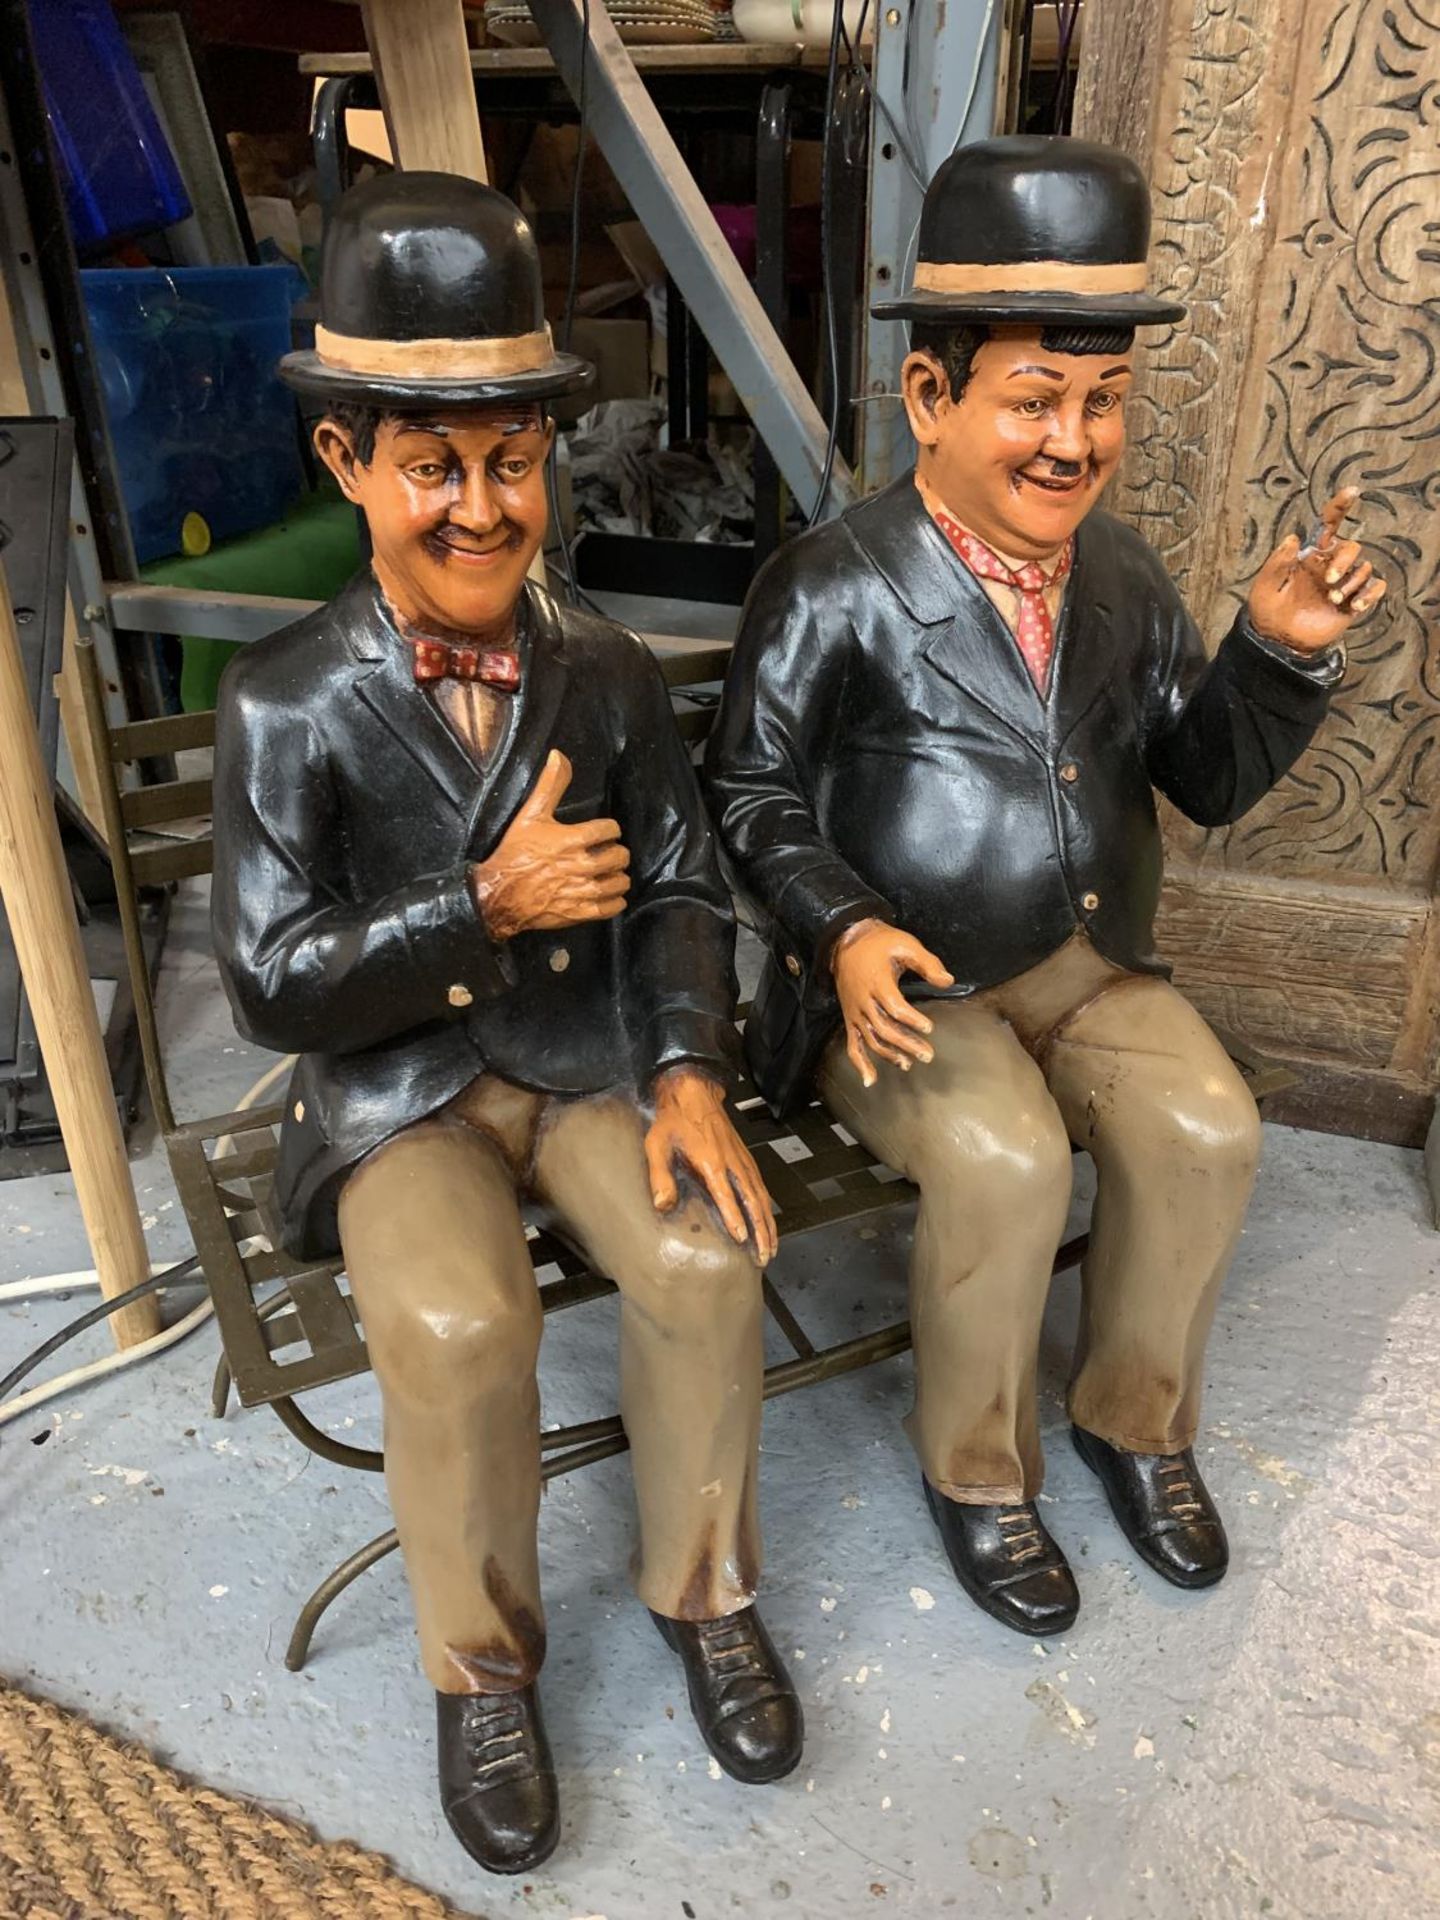 LARGE MODELS OF LAUREL AND HARDY SAT ON A CAST METAL SEAT